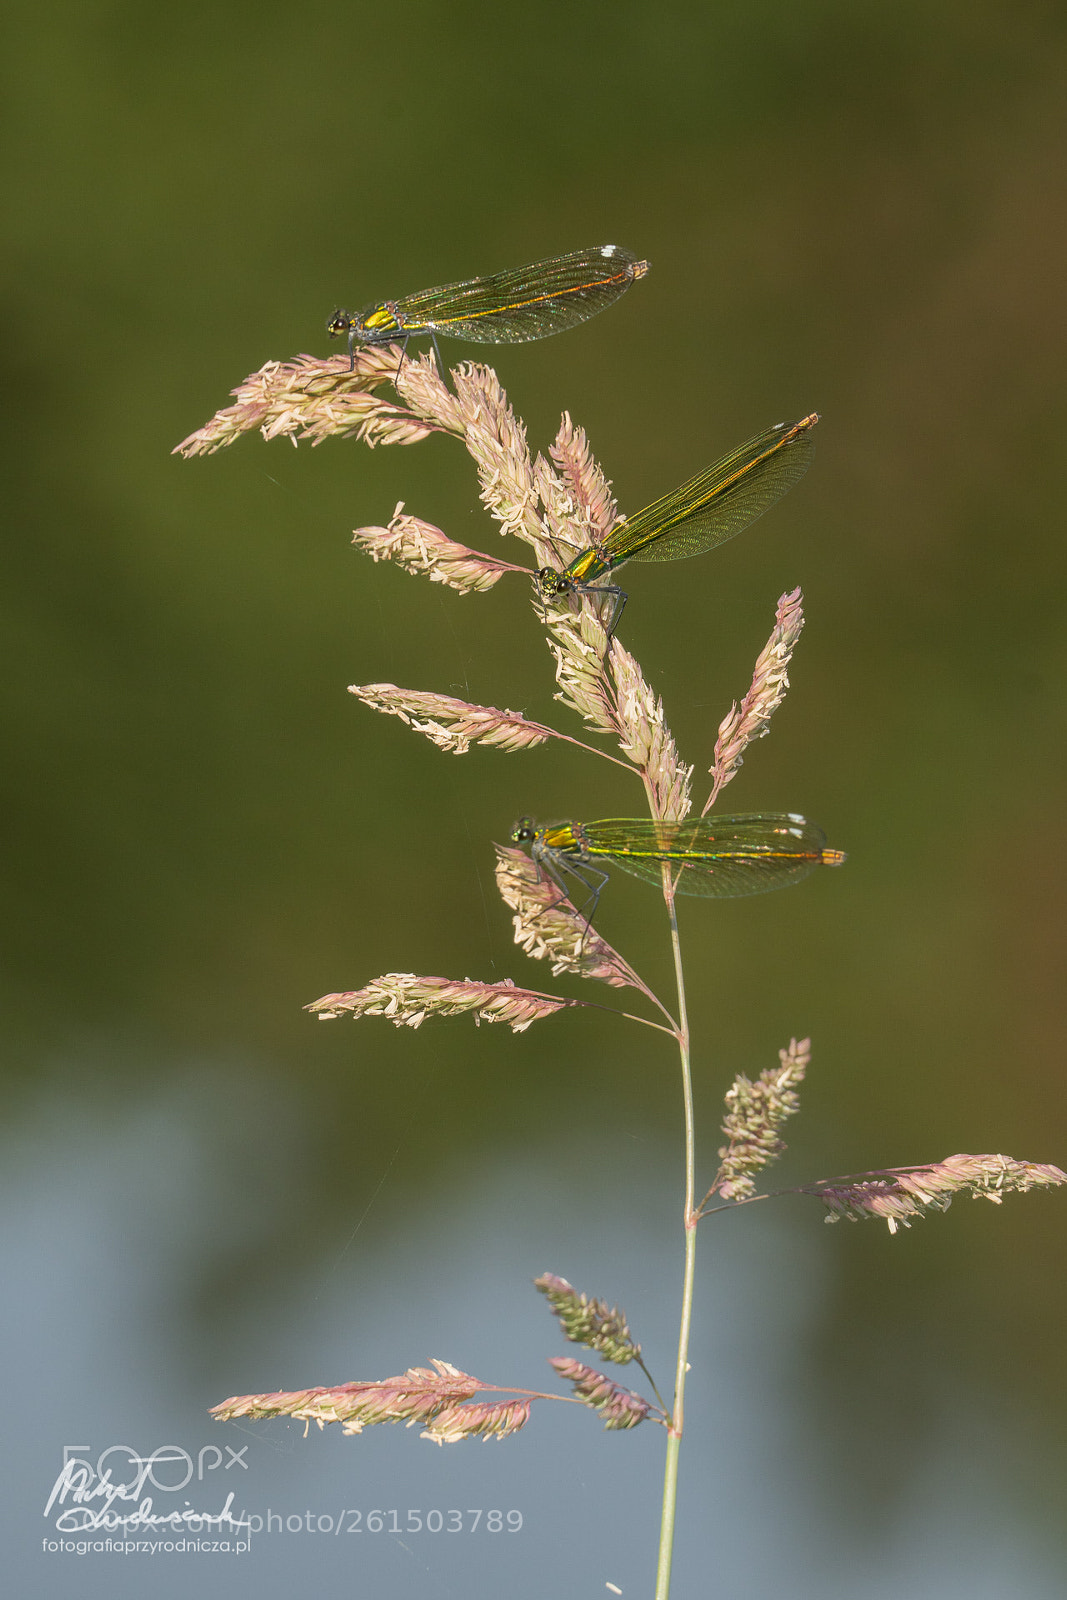 Sony a6500 sample photo. Three dragonflies photography